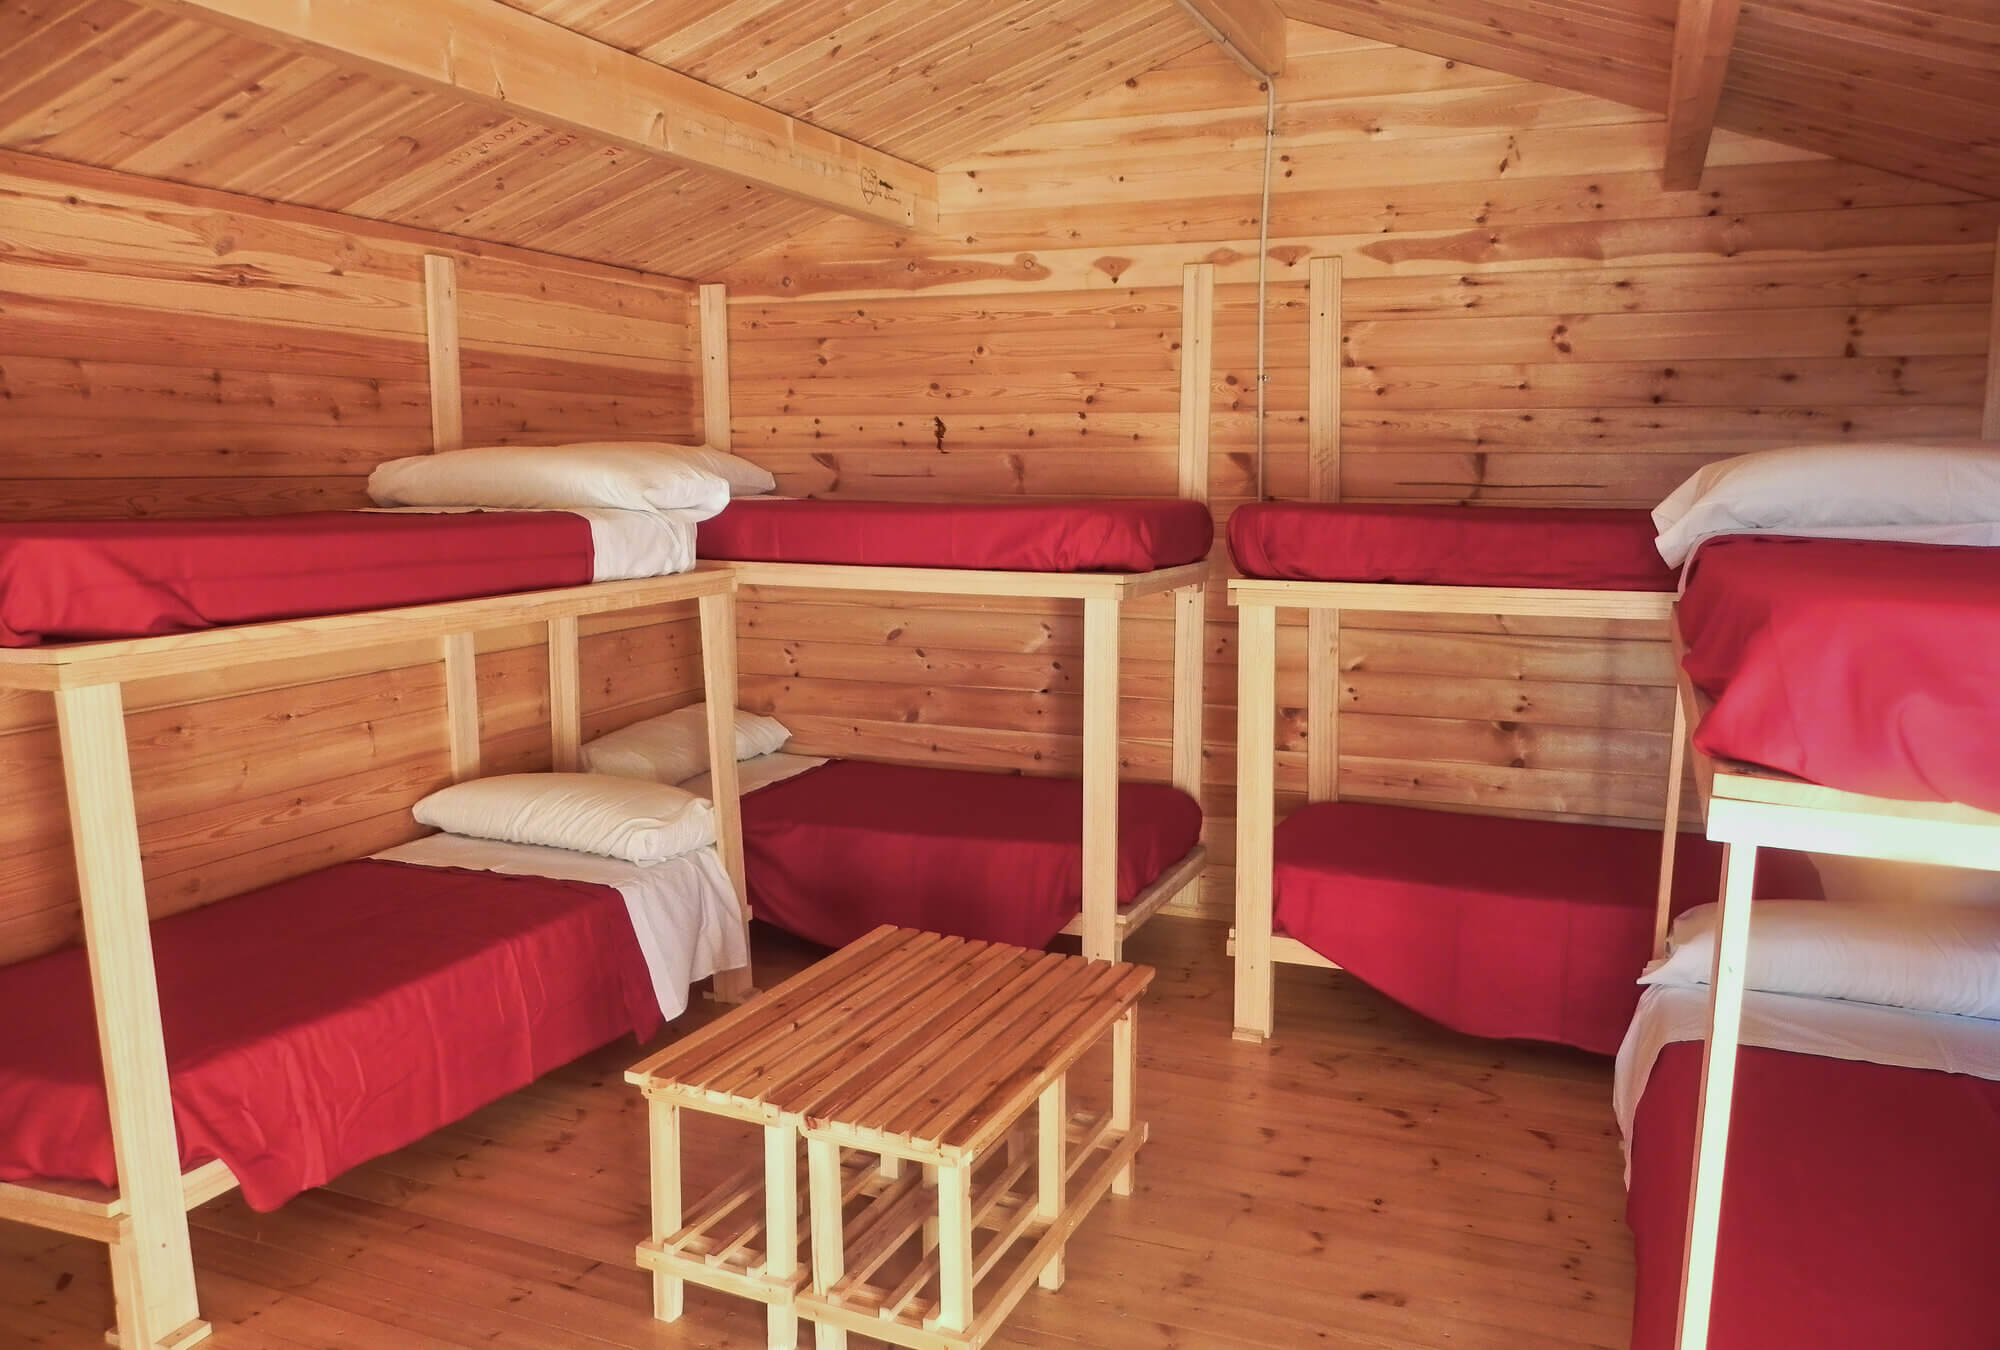 The kind of bunks that Camp Ramah in California might feature for its campers.